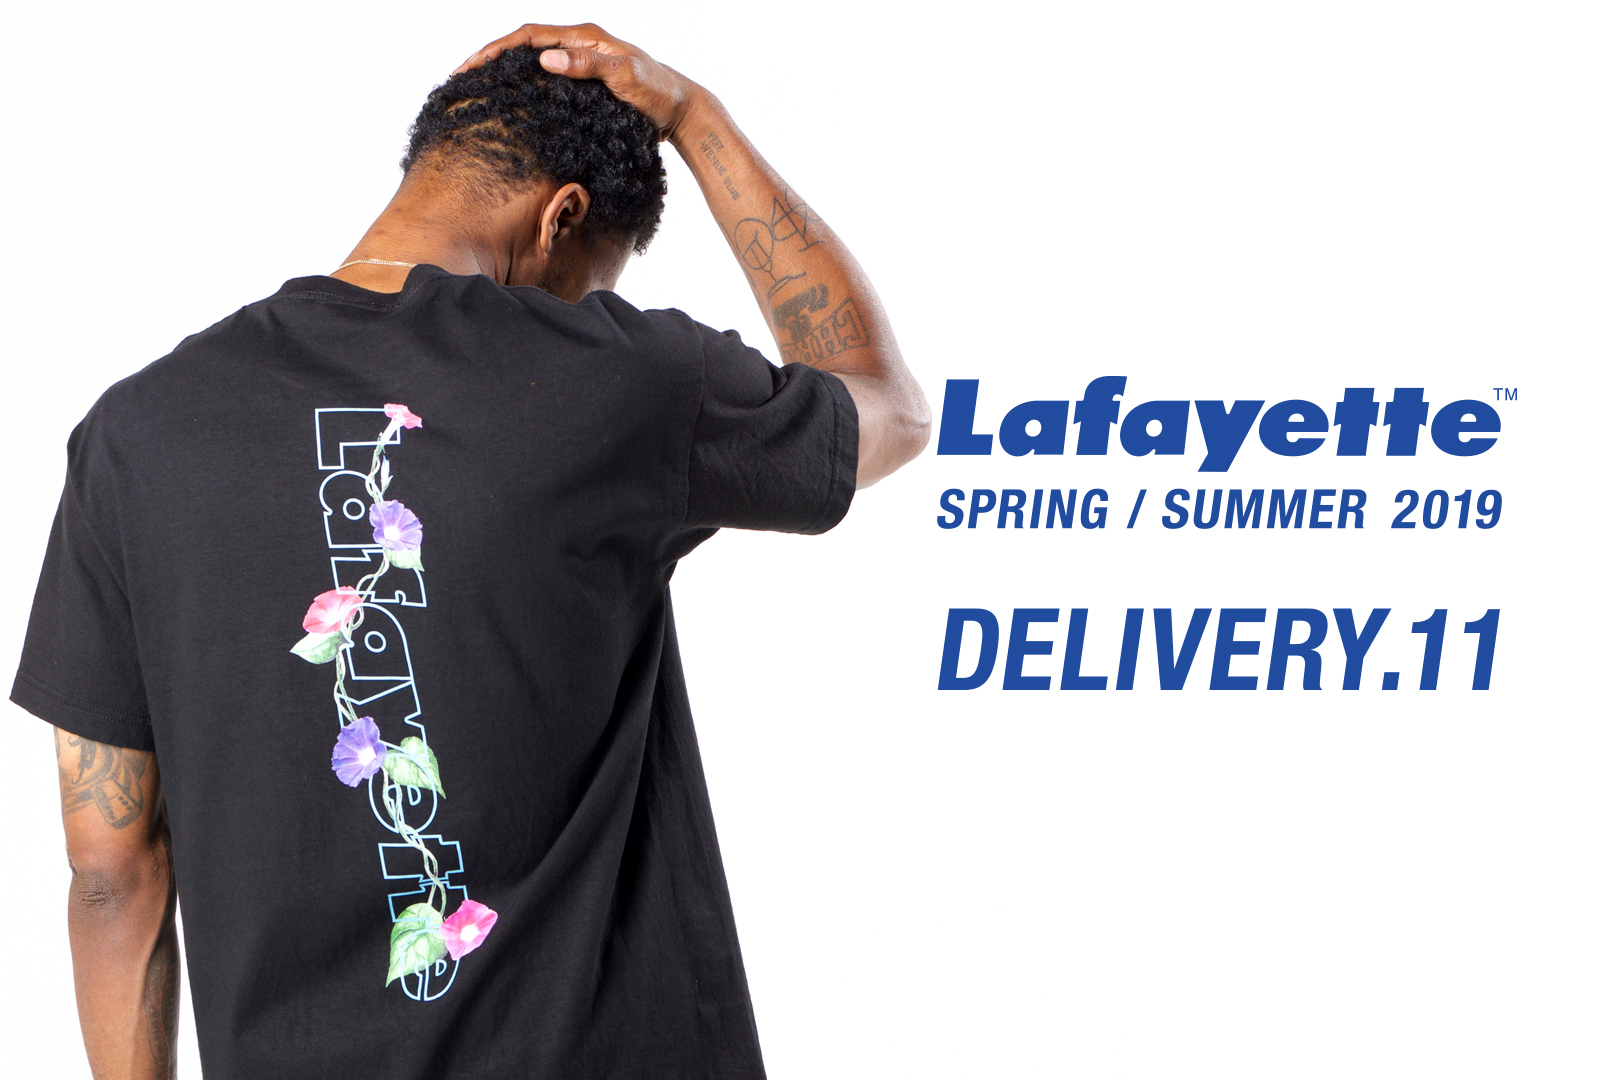 Lafayette 2019 Spring/Summer Collection Delivery.11